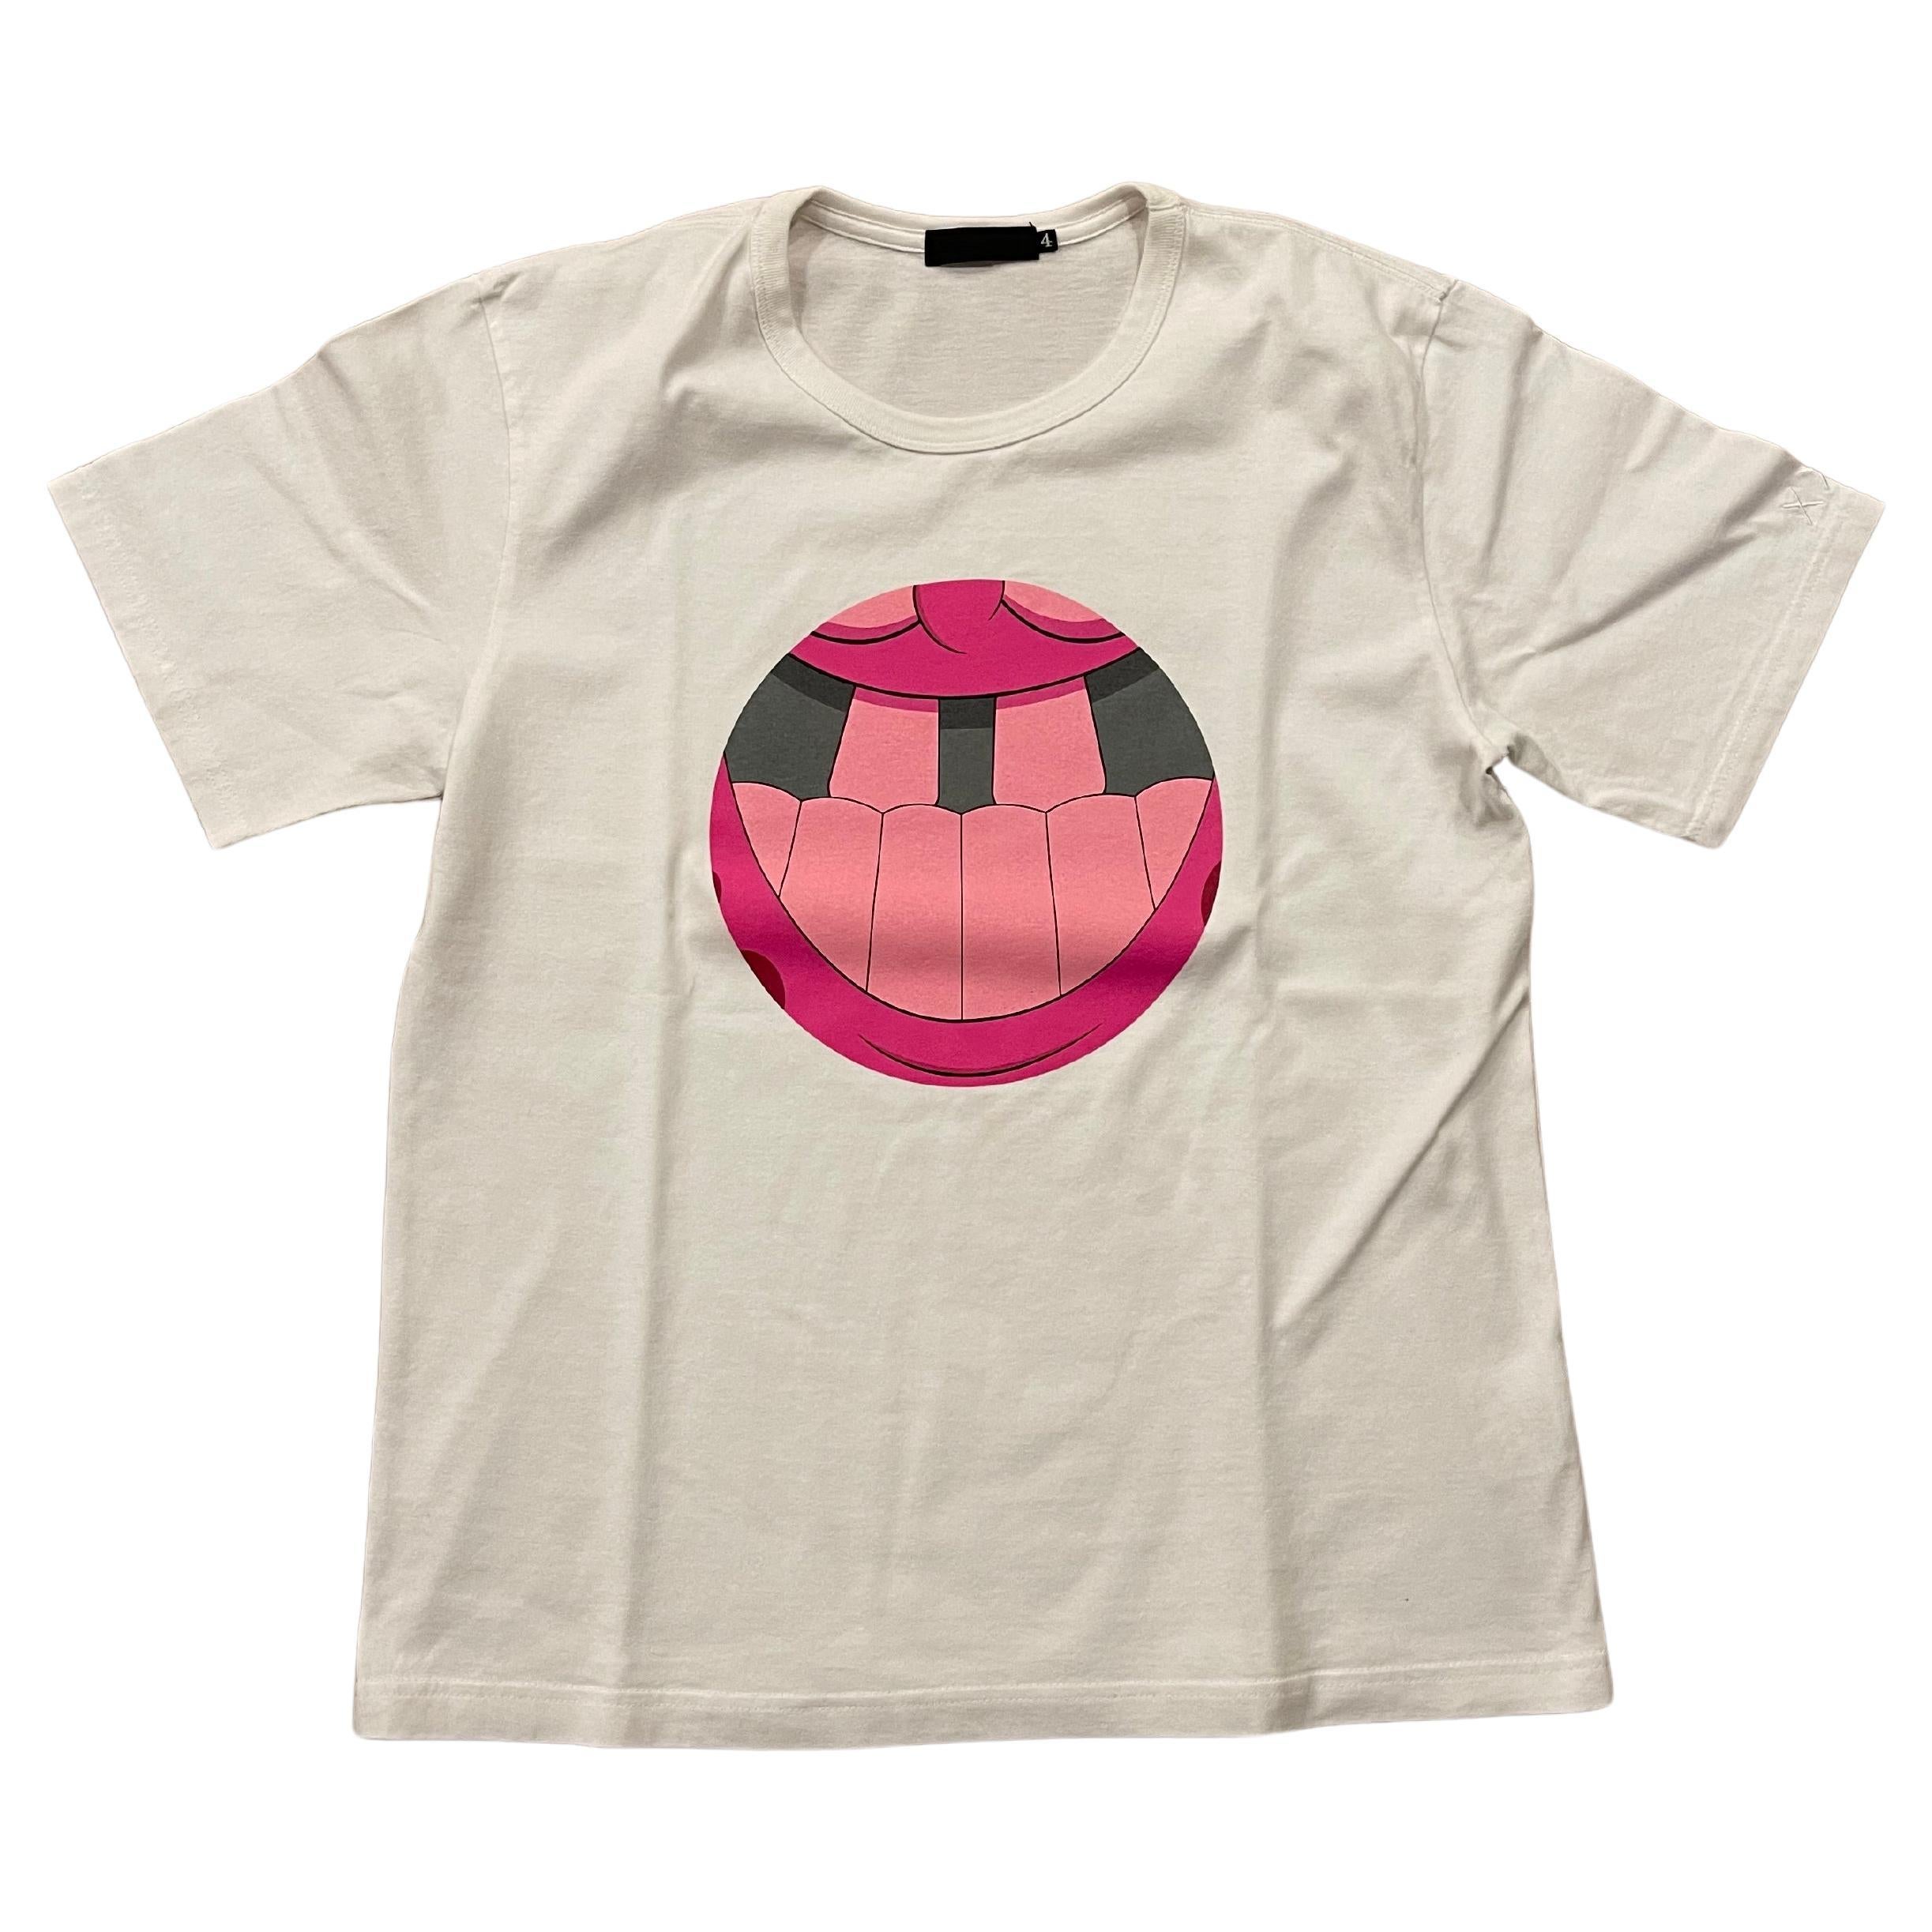 Original Fake Pink Tee Face White Short Sleeve Tee For Sale